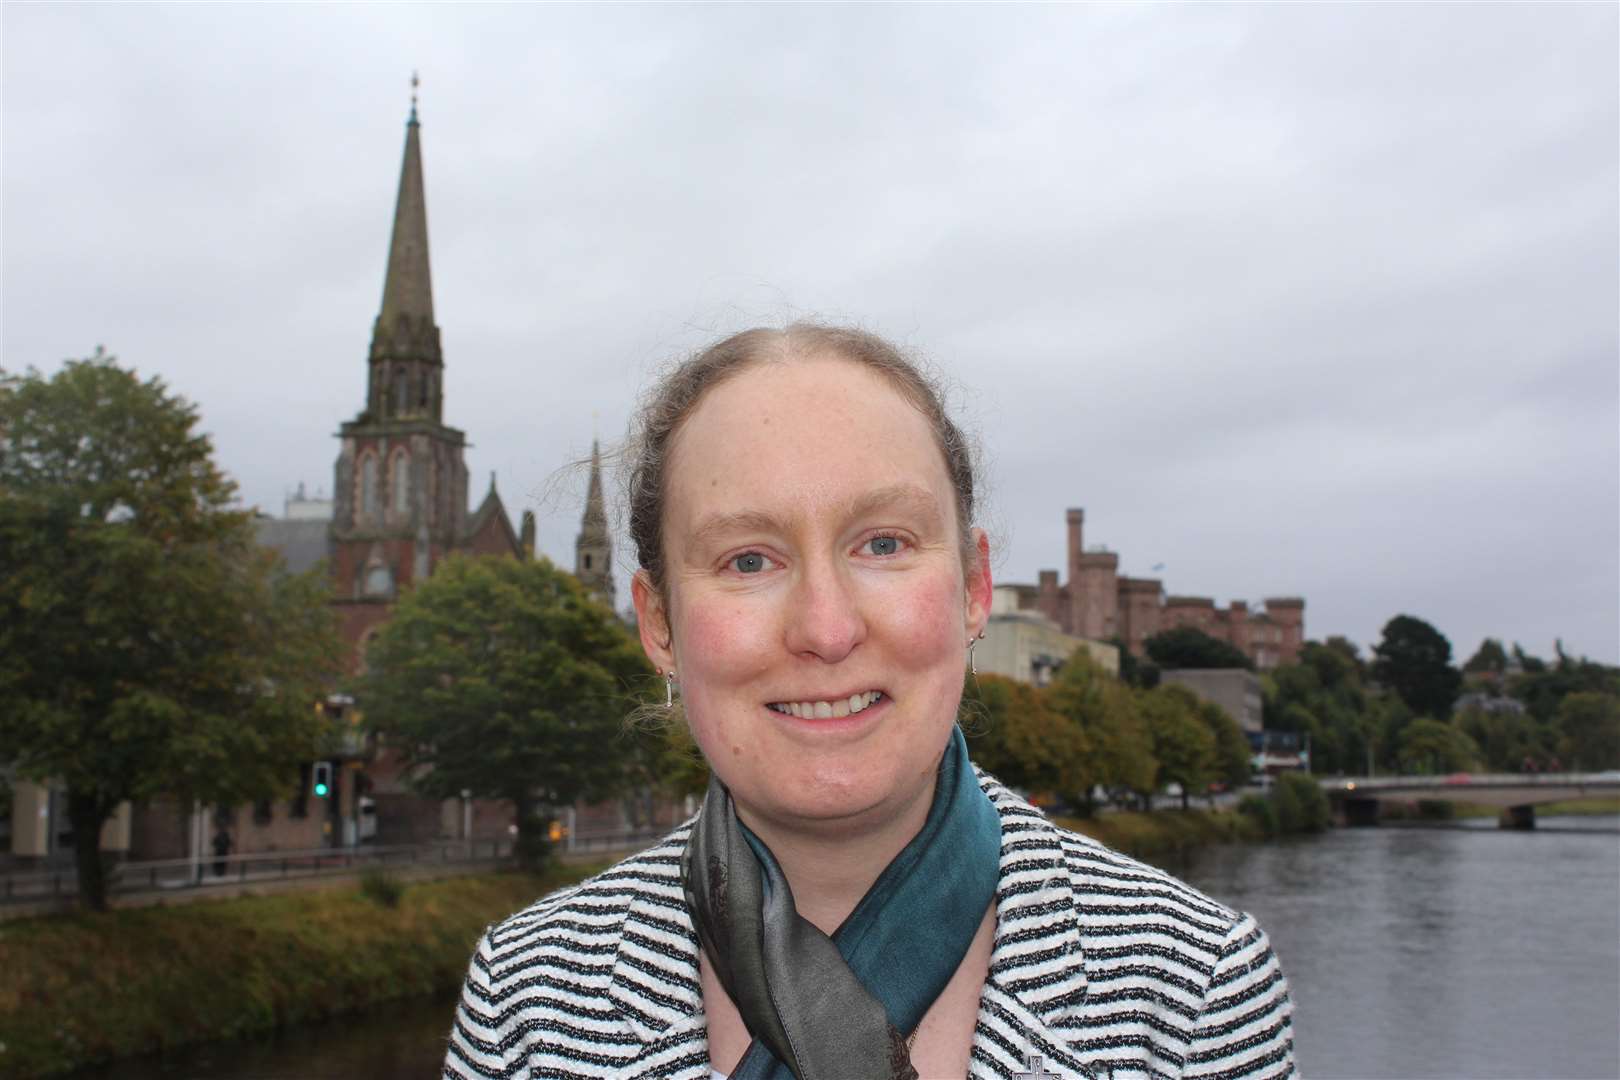 Liberal Democrat candidate Mary Dormer